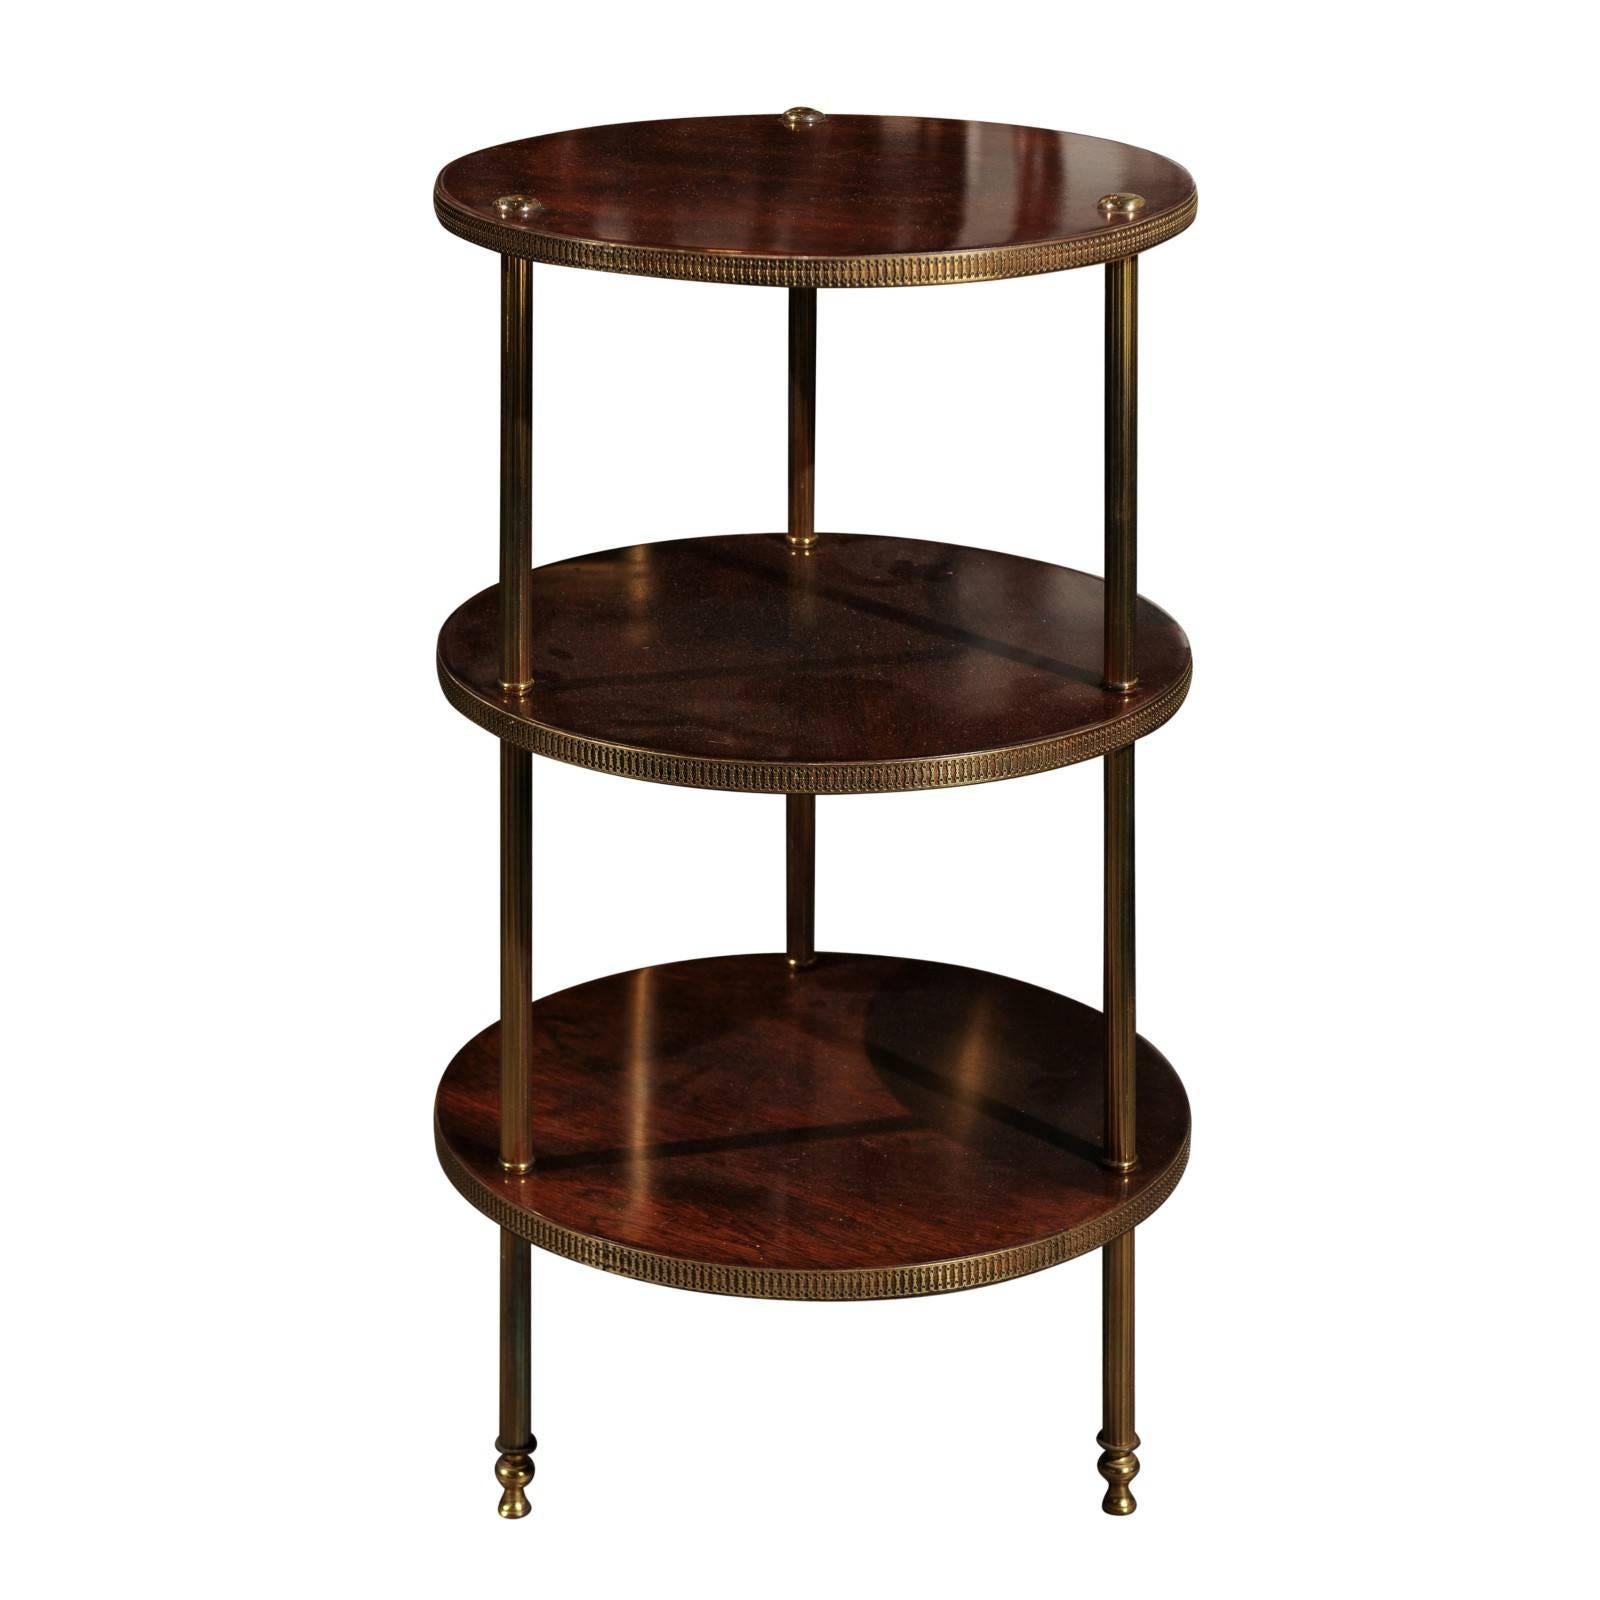 Vintage Italian 1950s Wood and Brass Three-Tiered Stand with Fluted Supports